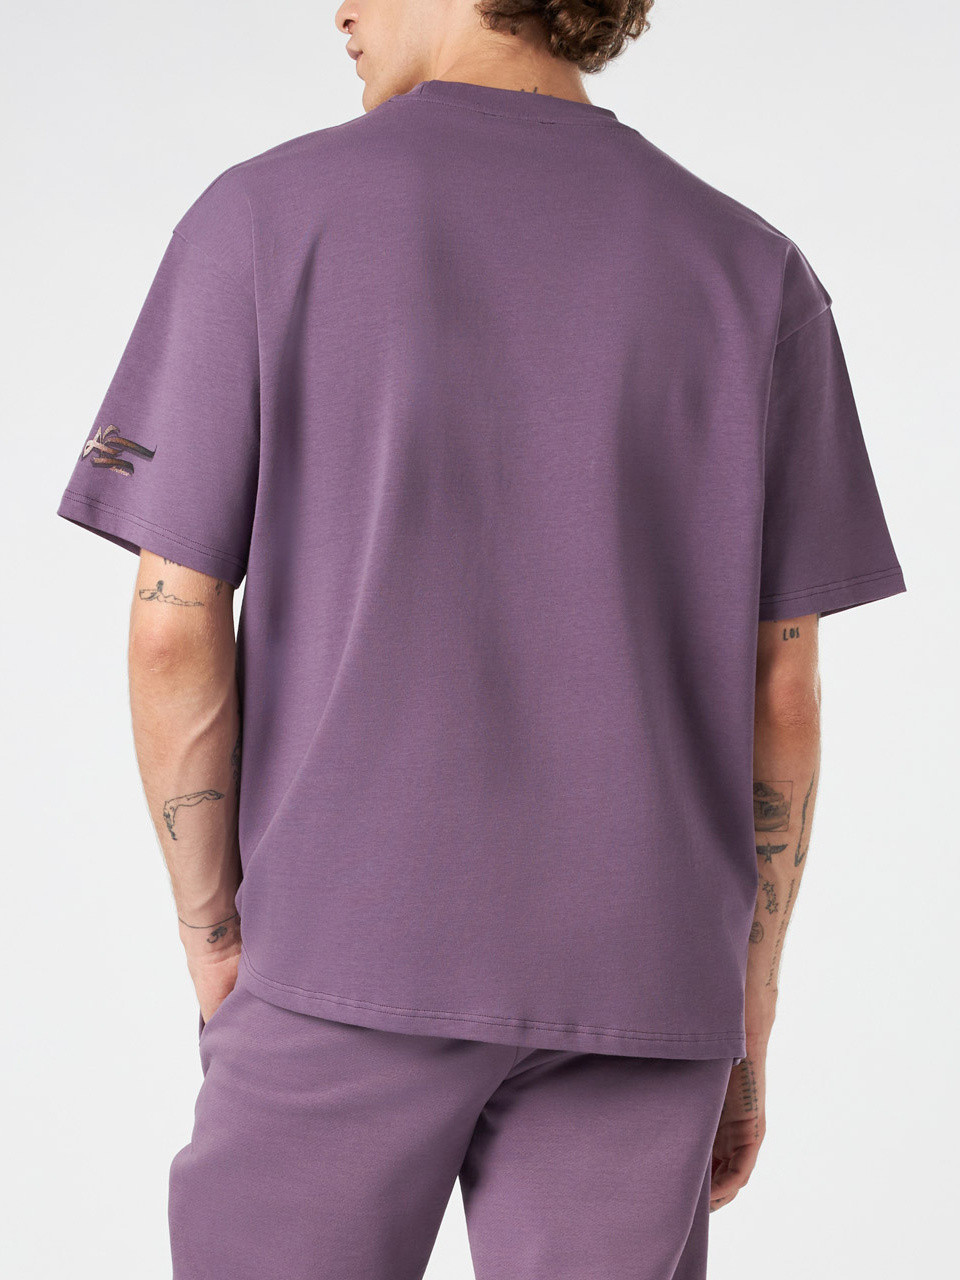 Phobia - Cotton T-shirt with shark print, Purple, large image number 4